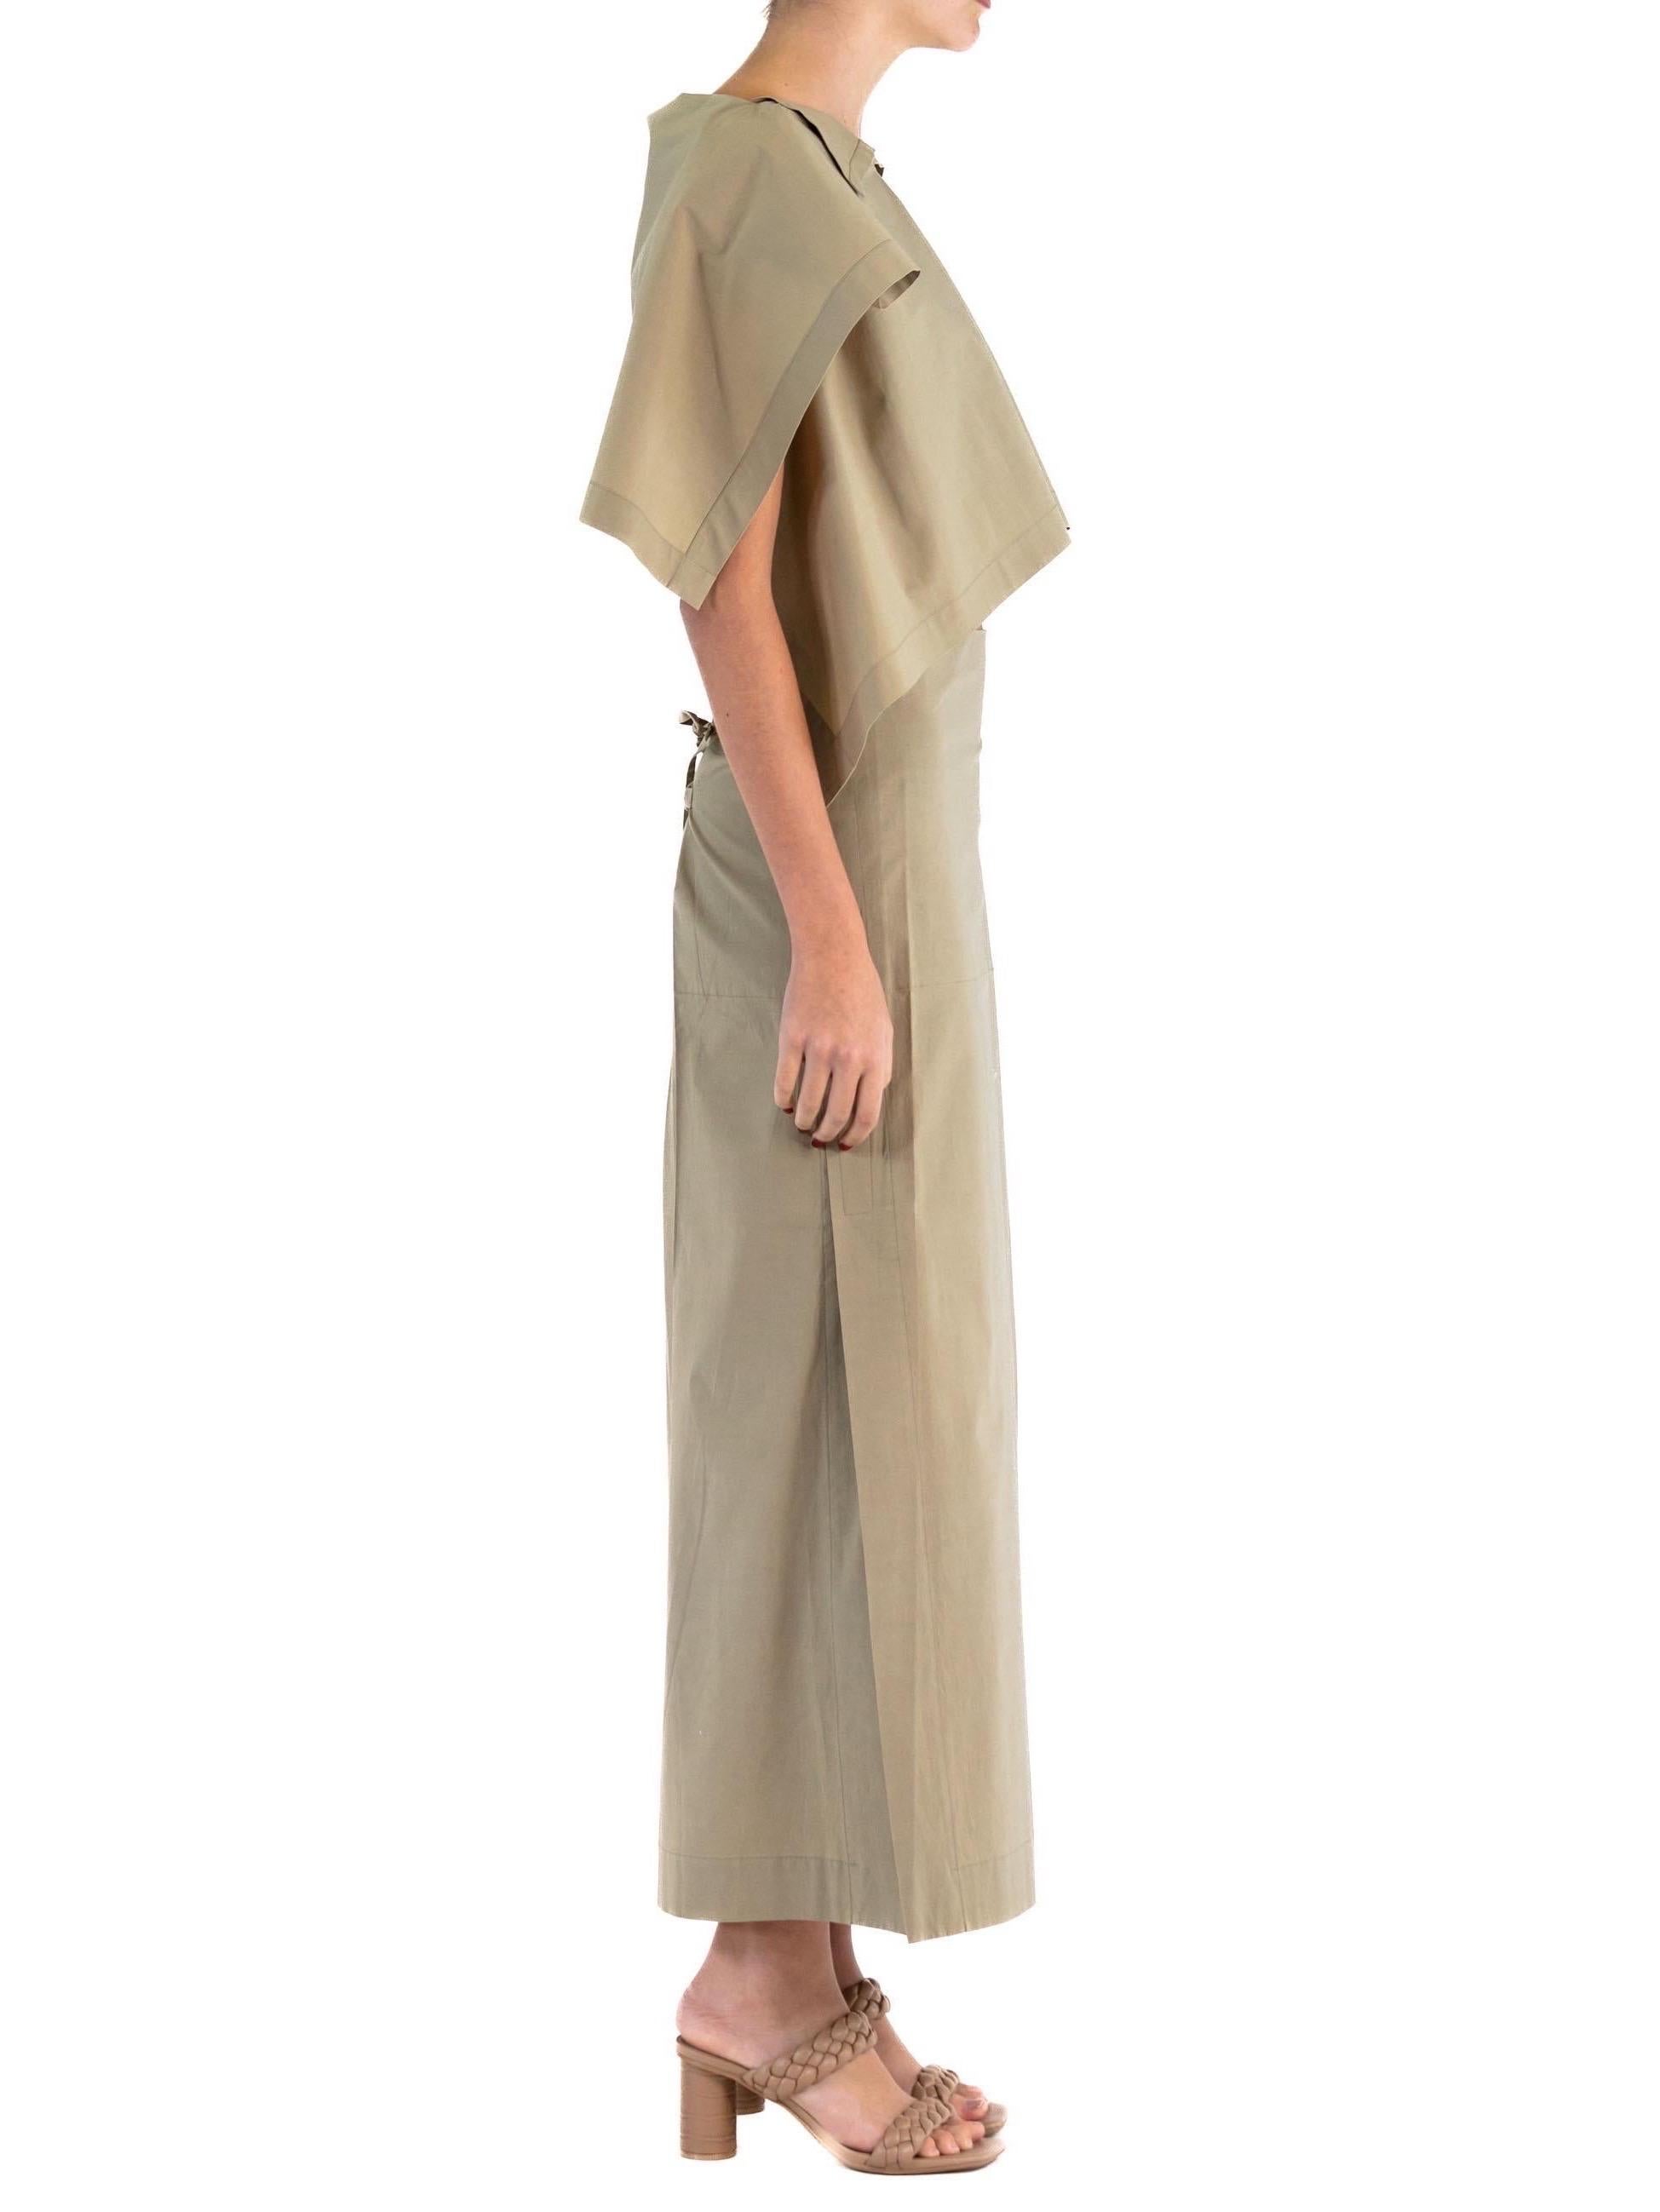 Women's or Men's 1990S ISSEY MIYAKE Beige Cotton Top And Skirt Ensemble For Sale